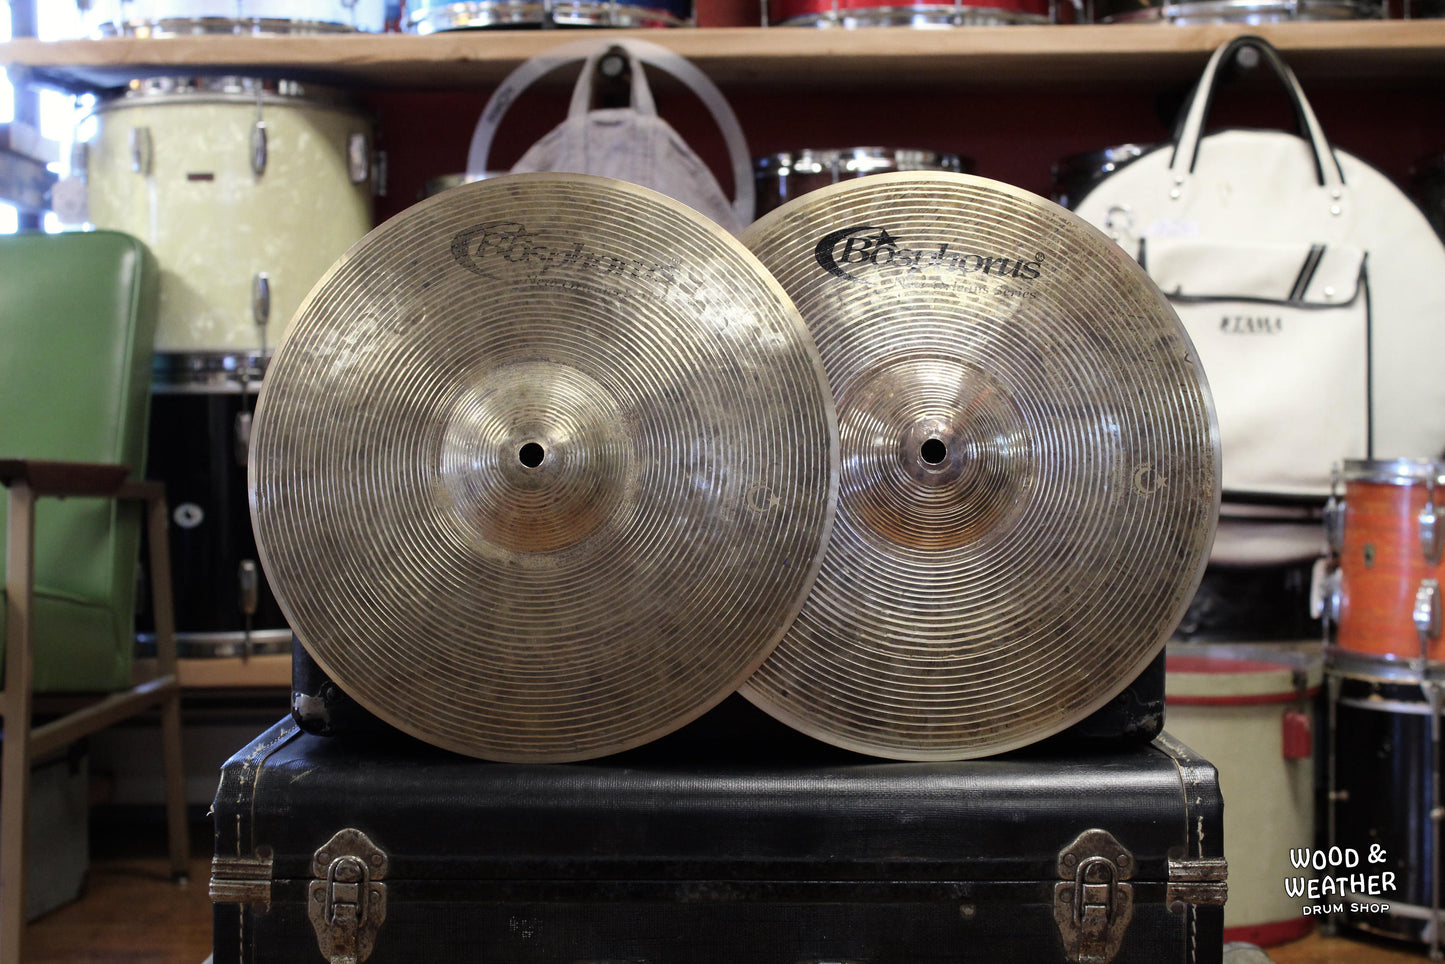 Used Bosphorus Cymbals 12" New Orleans Series Hi Hat Cymbals 570/731g